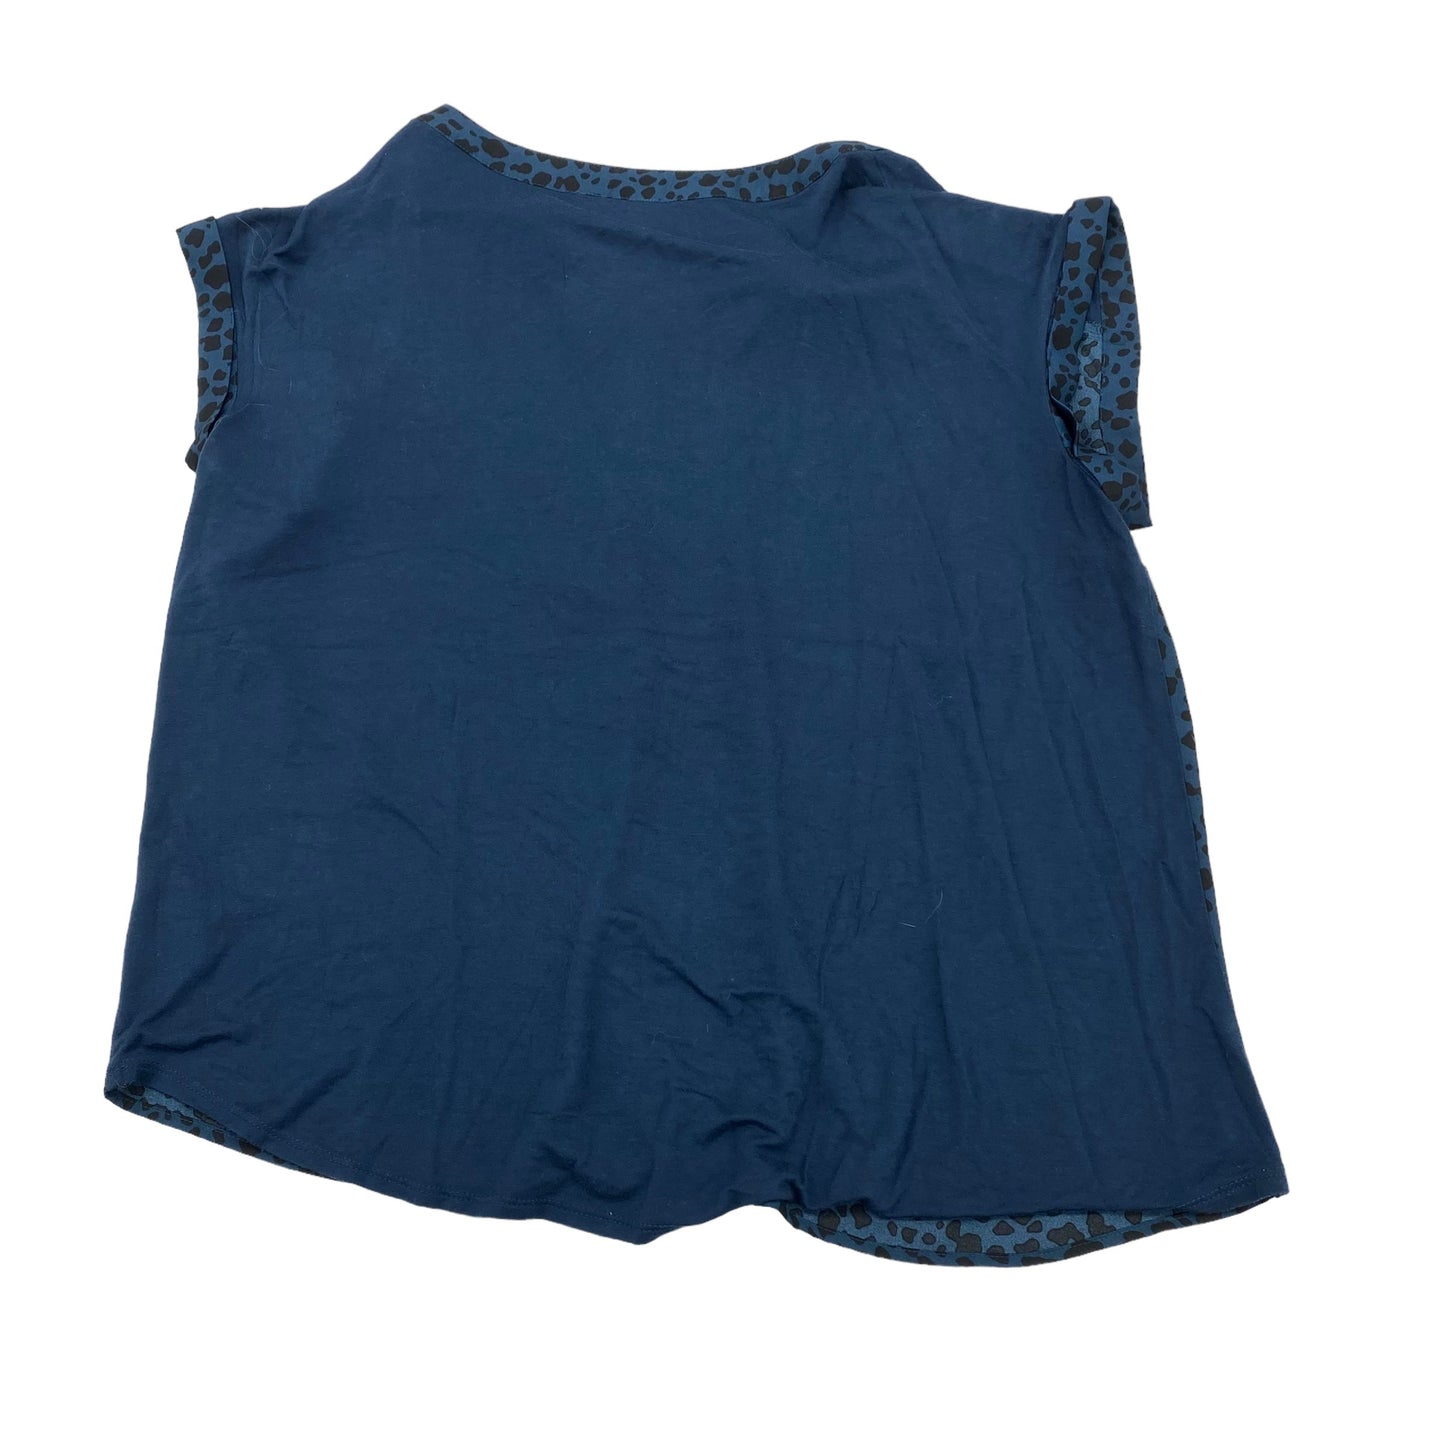 BLUE FORTUNE & IVY TOP SS, Size 2X